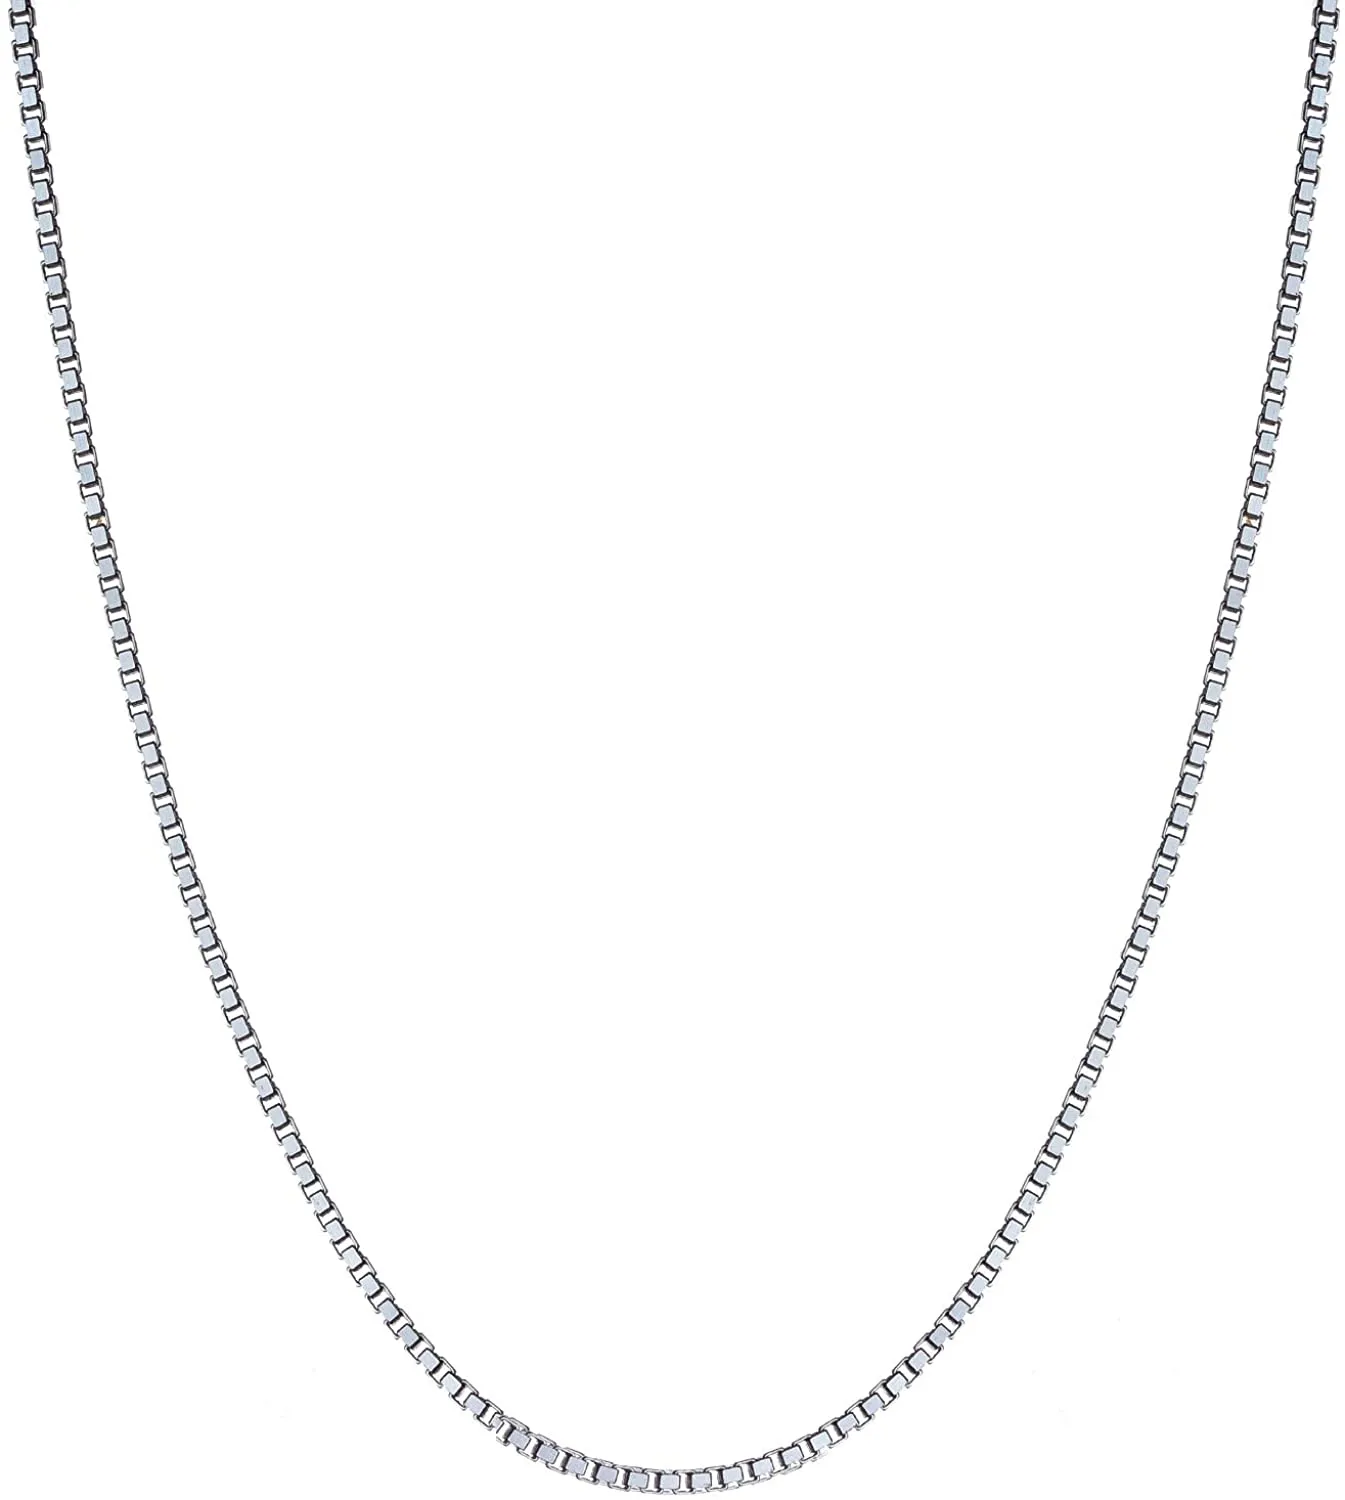 Whole 1 4mm 925 Sterling Silver Necklace Box Chains Jewelry 16 18 20 22 22 26 28 30 8サイズchoice323p